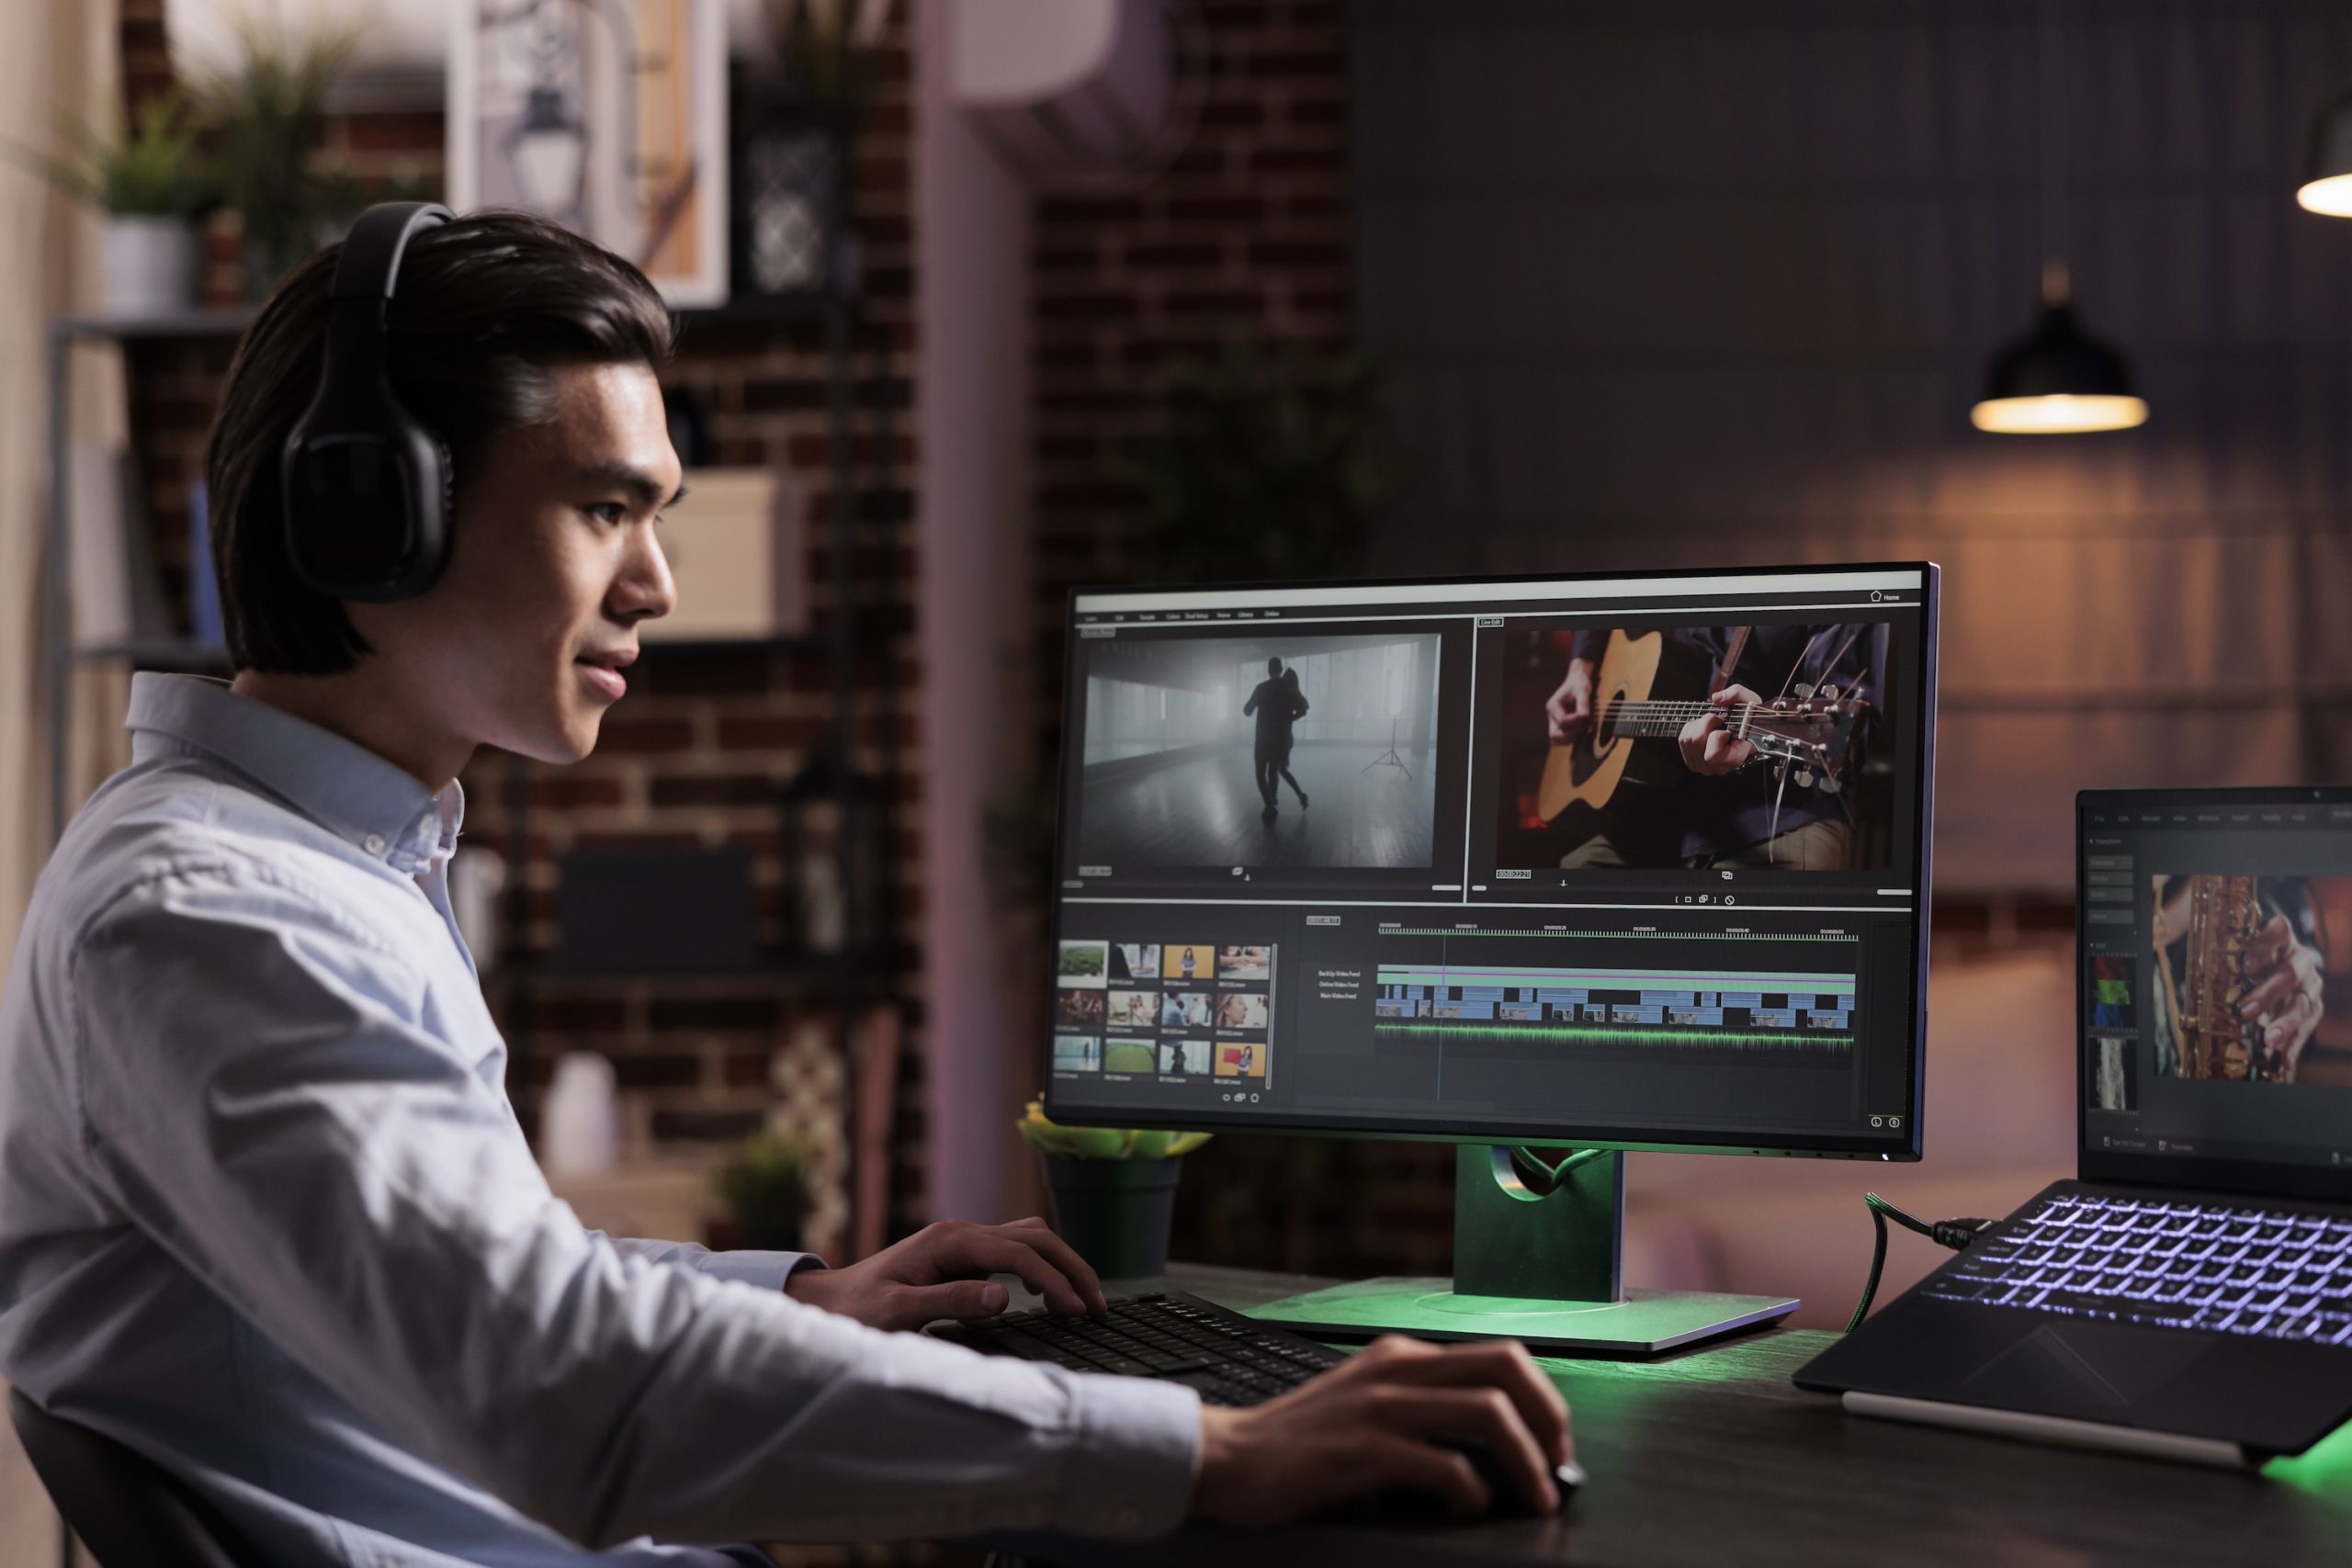 Video Editing Agency Services Explained